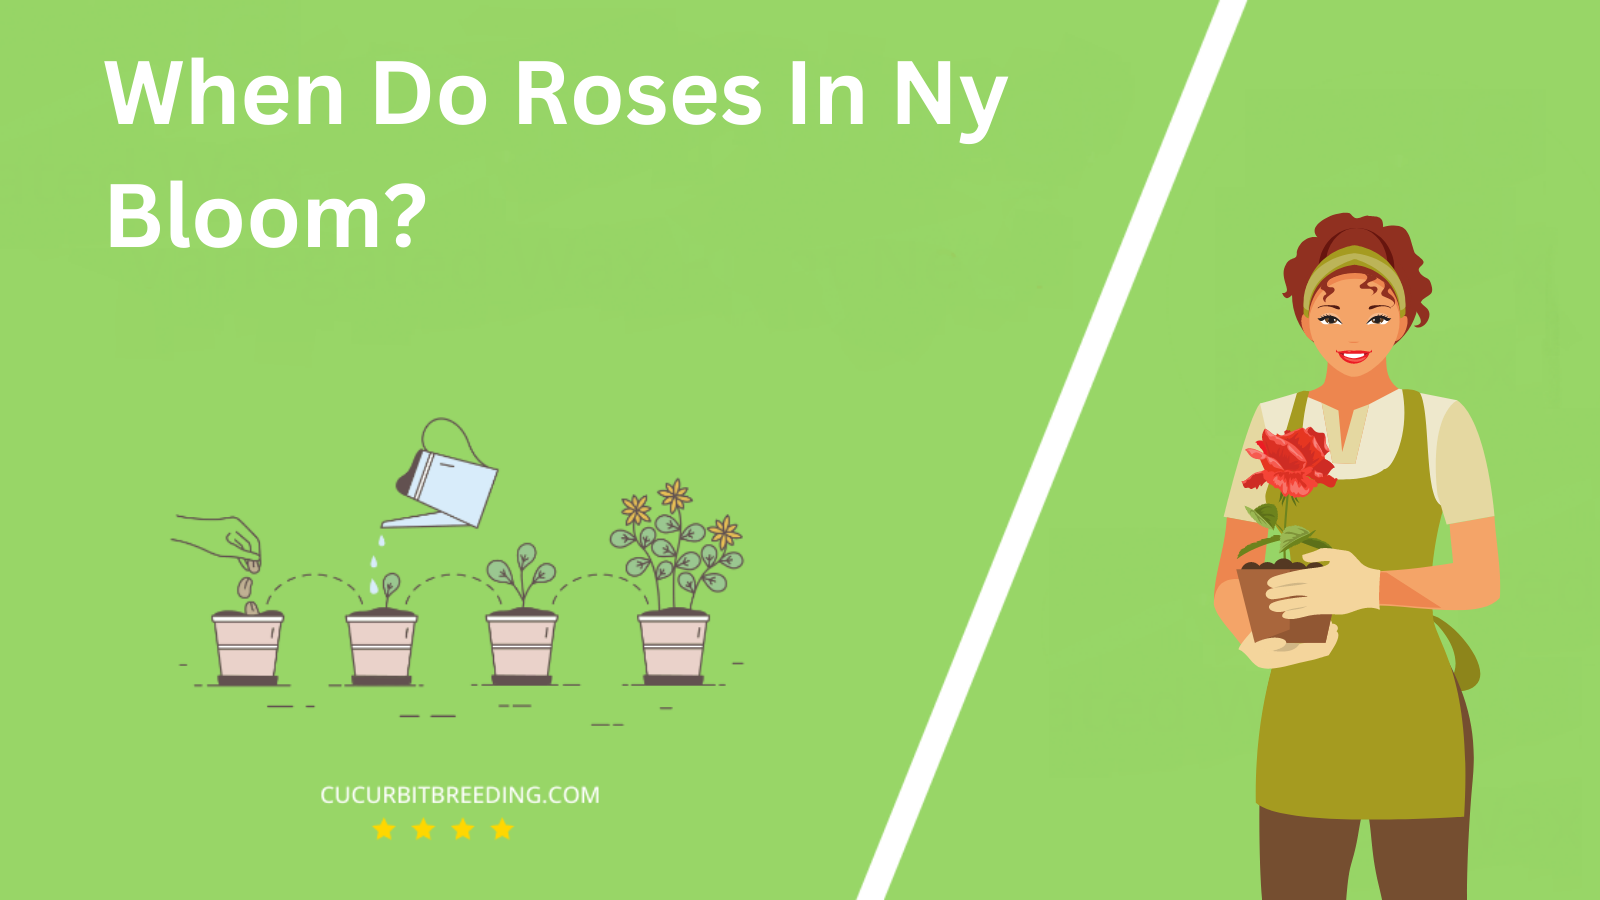 When Do Roses In Ny Bloom?